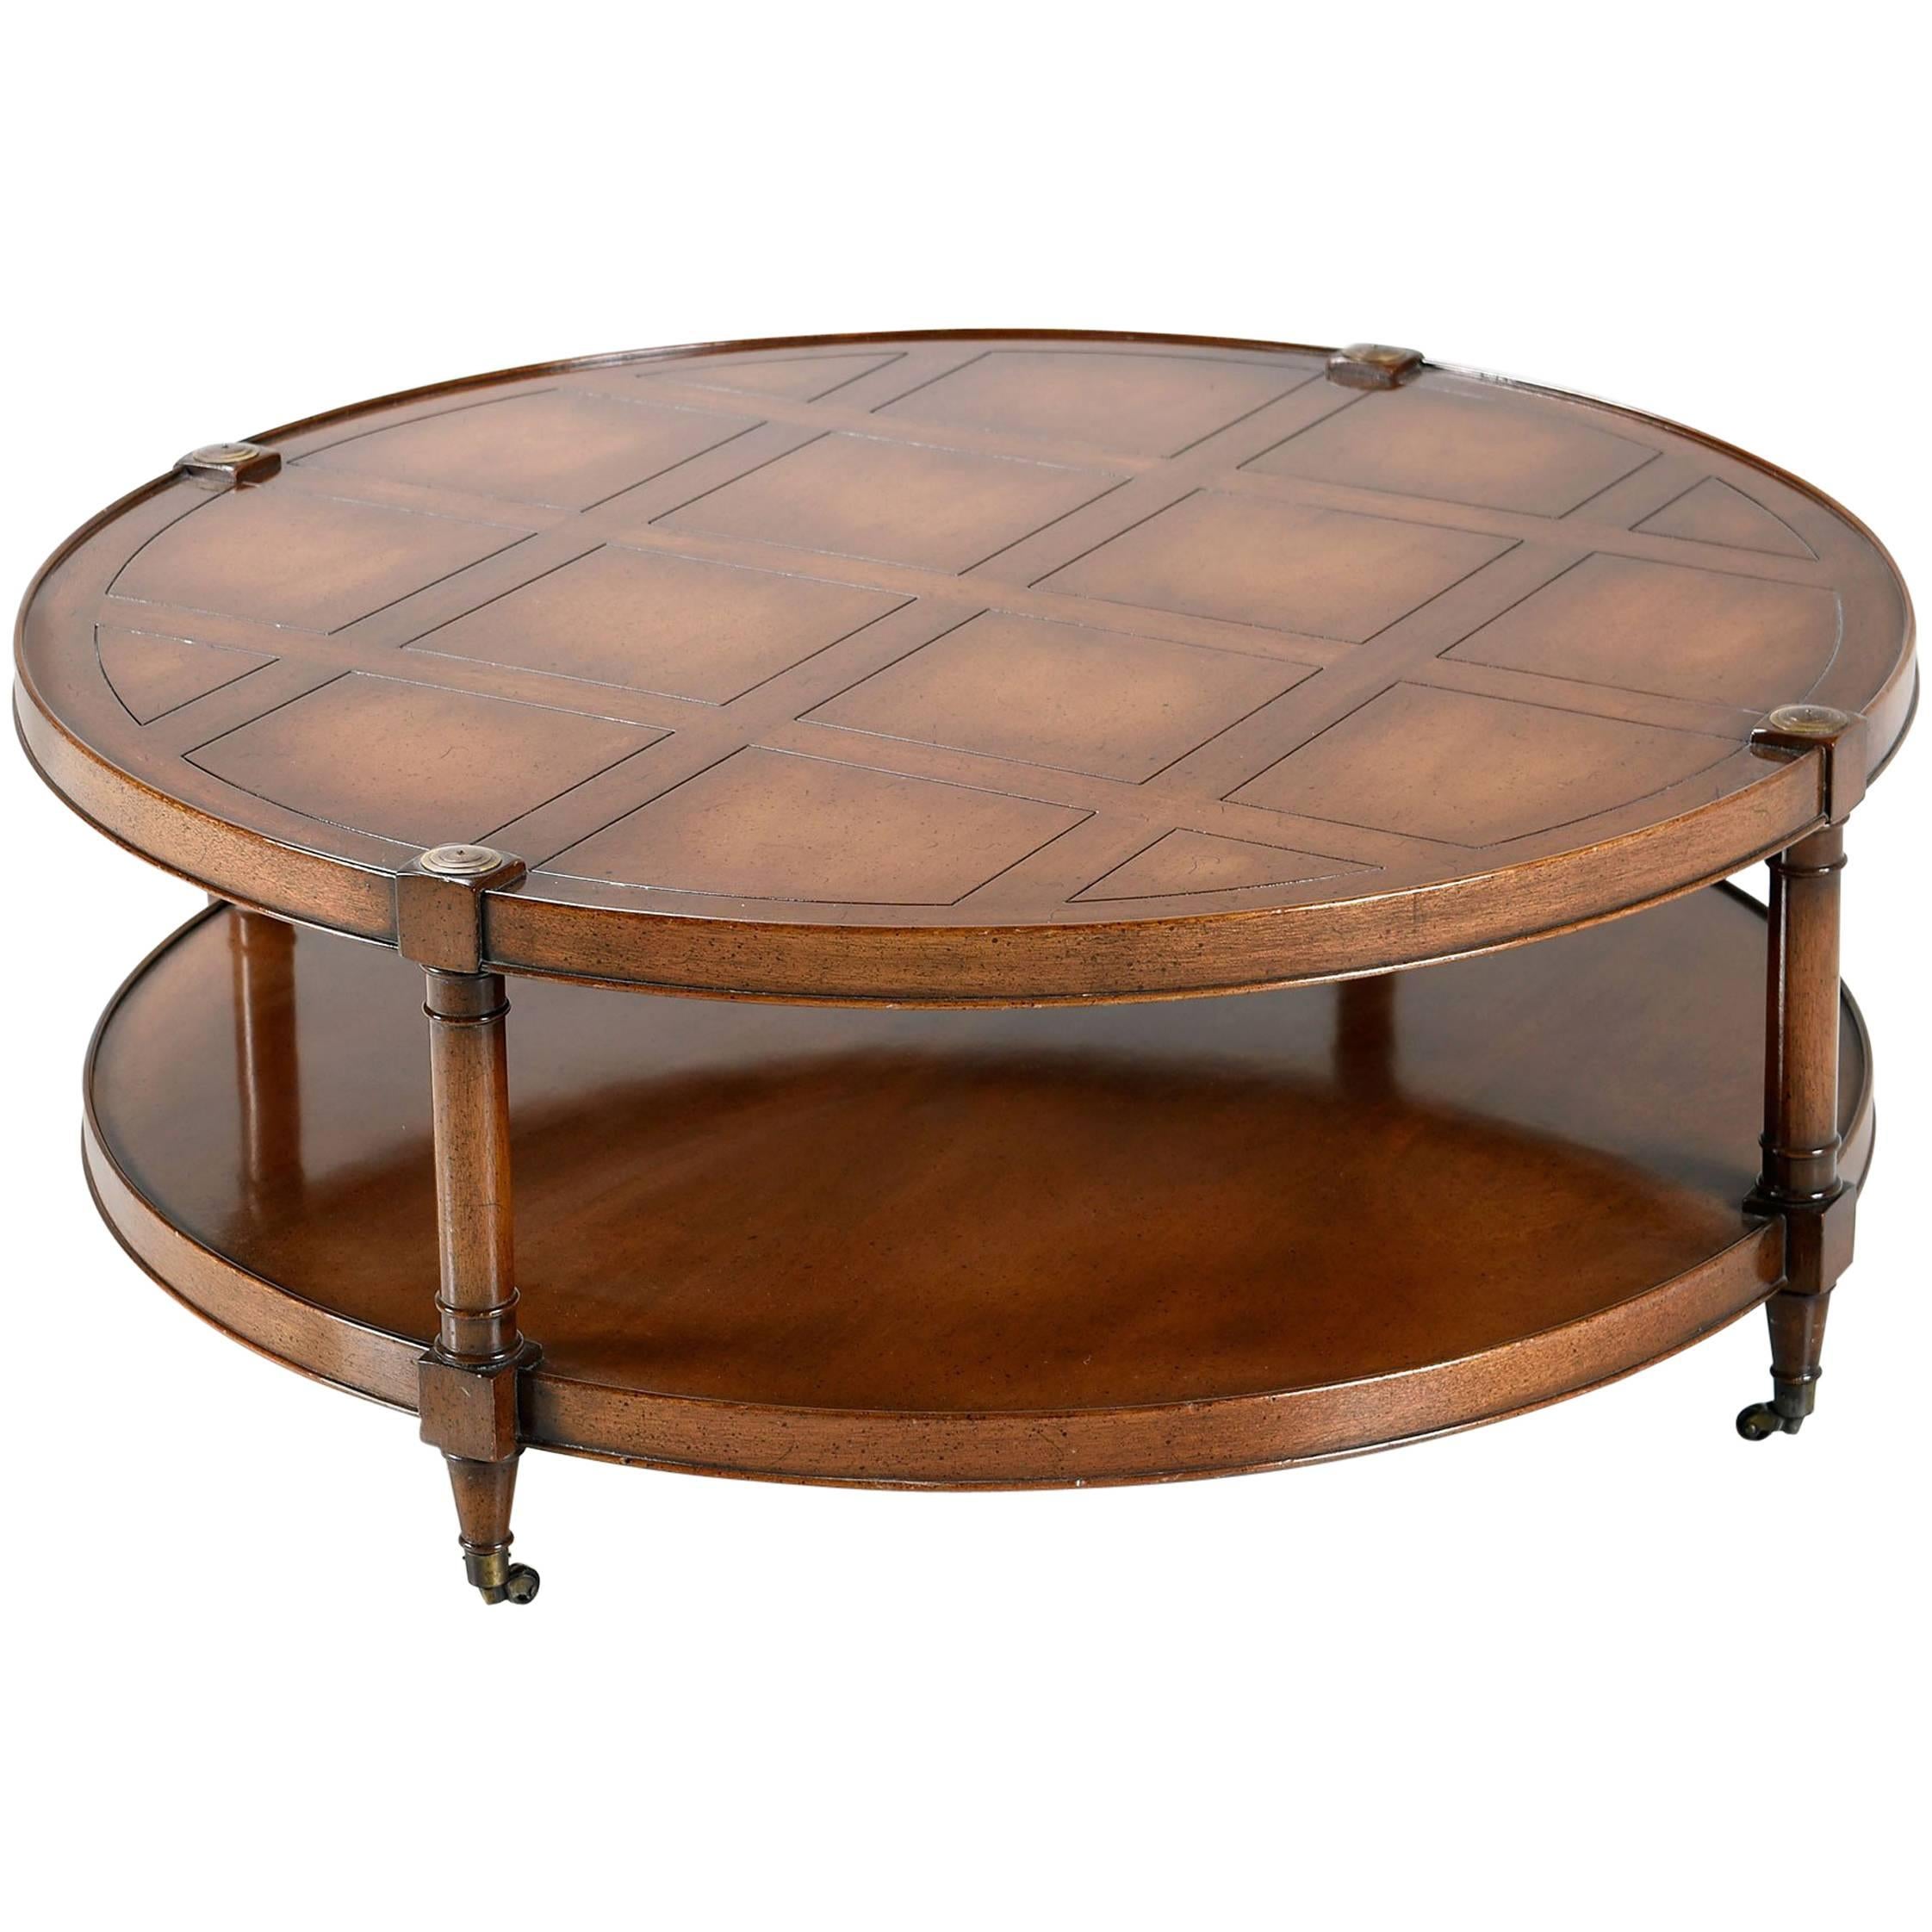 Heritage Mahogany Round Coffee Table on casters